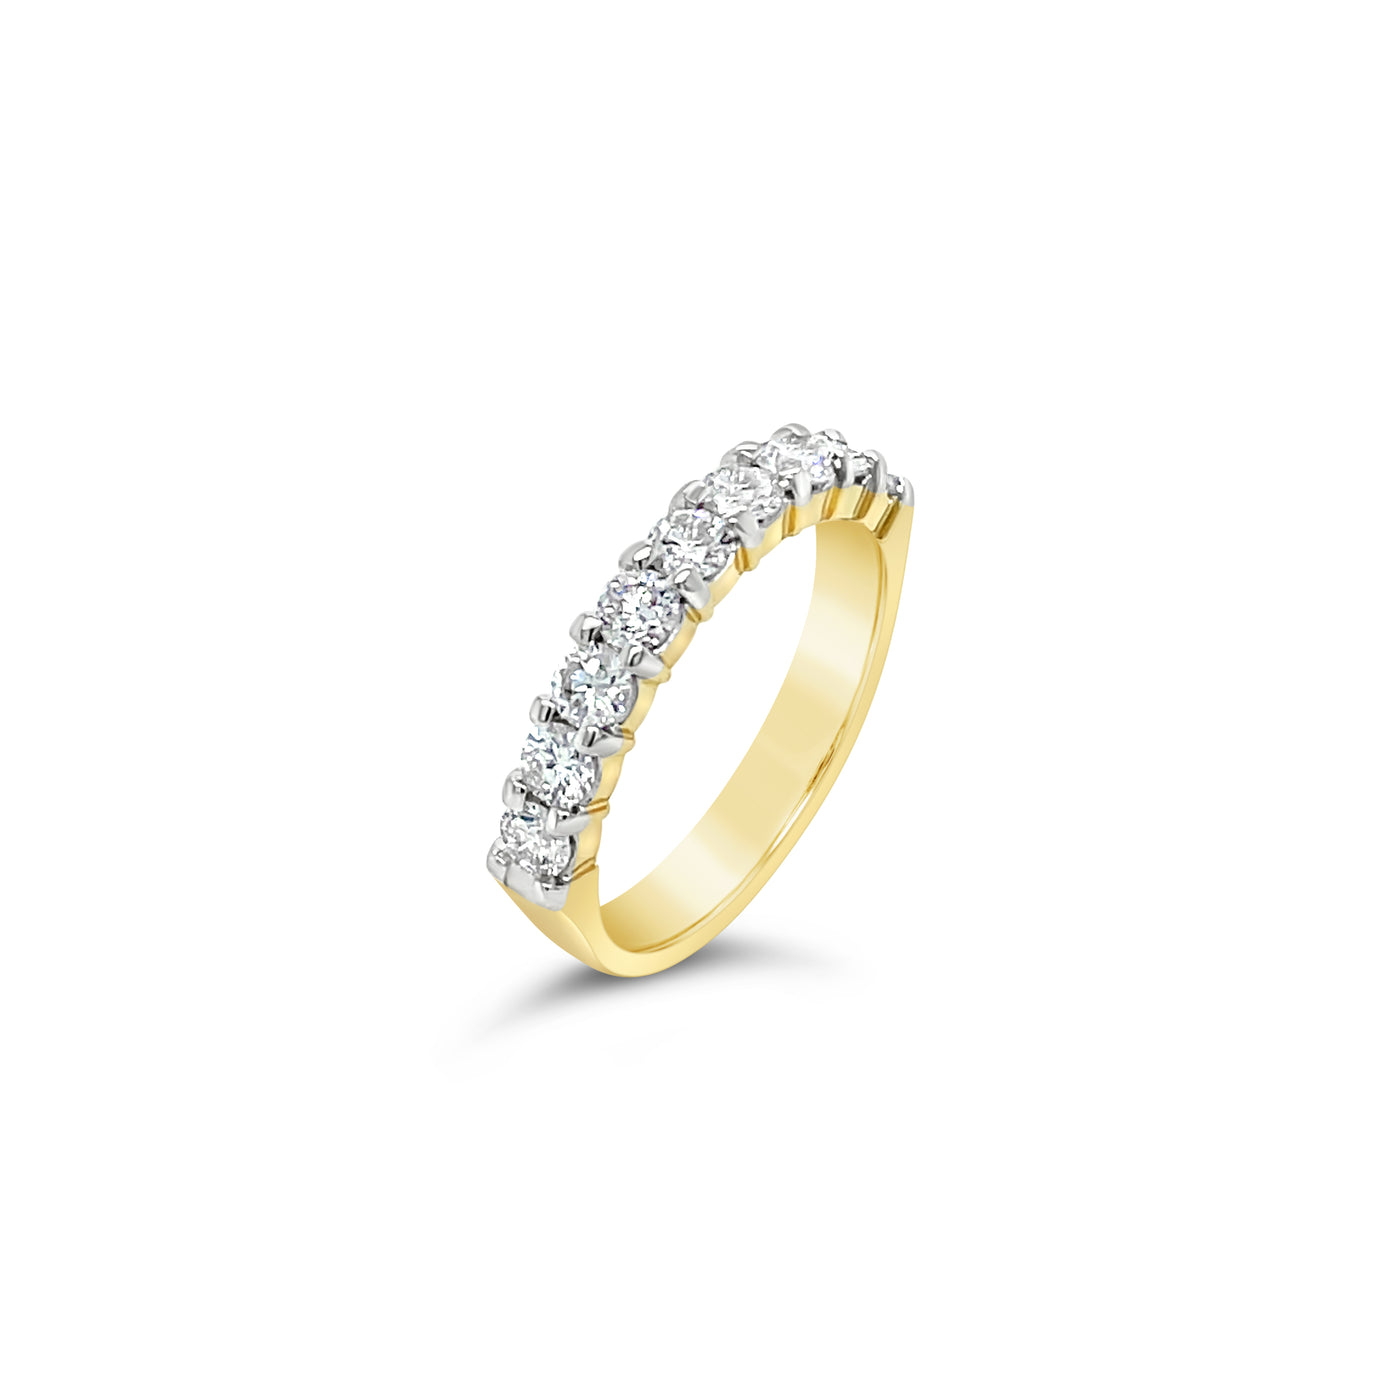 18Ct Yellow Gold Anniversay Ring With Round Brilliant Cut Diamonds Claw Set